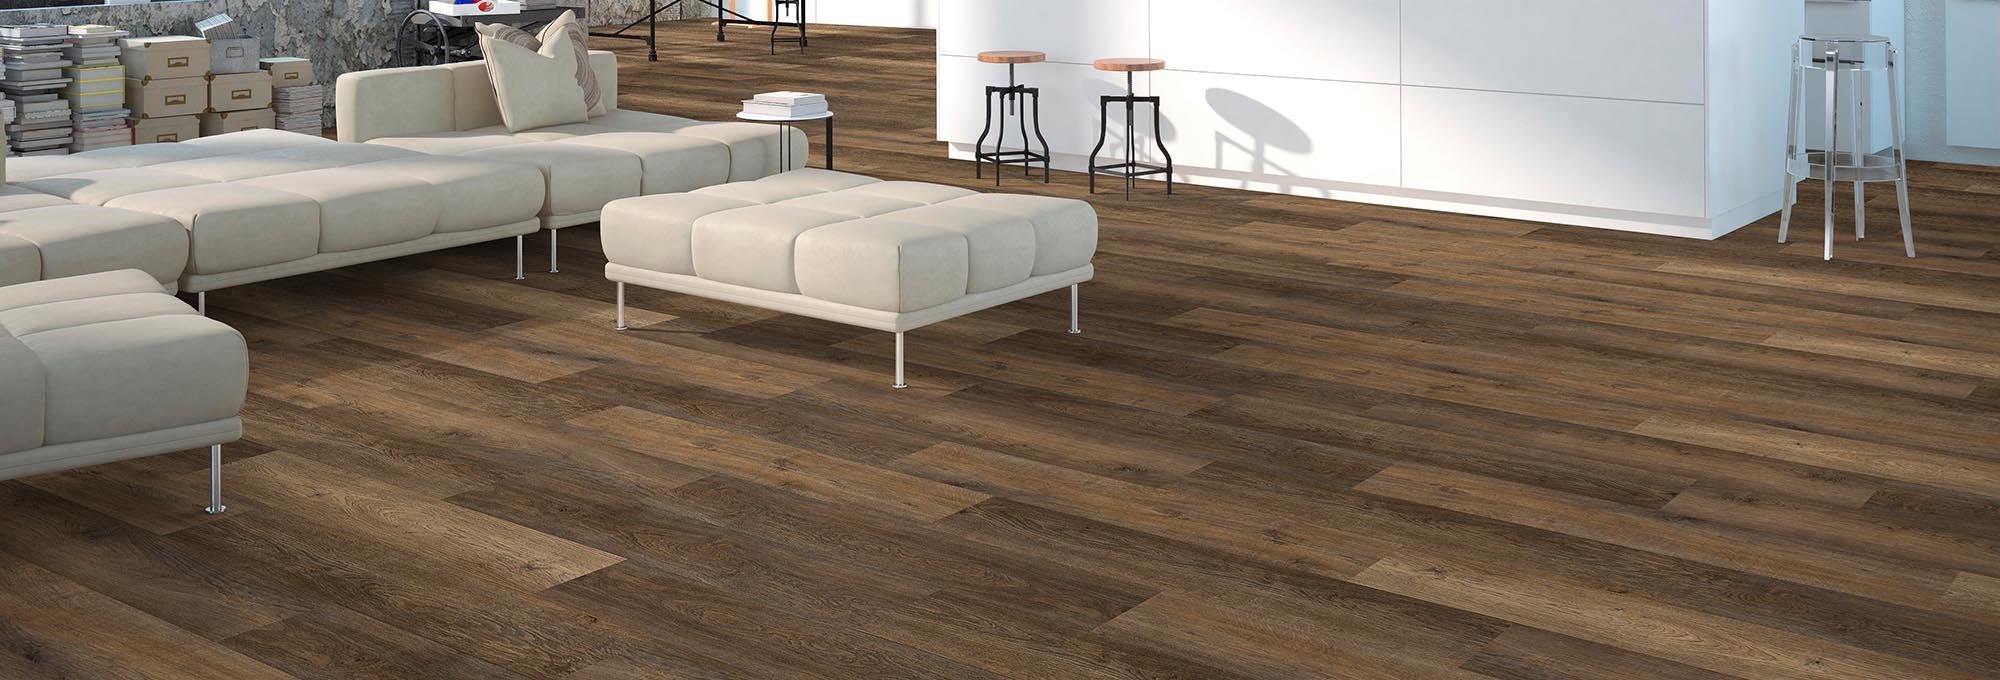 Shop Flooring Products from COLORTILE CarpetsPlus in Port Charlotte, FL